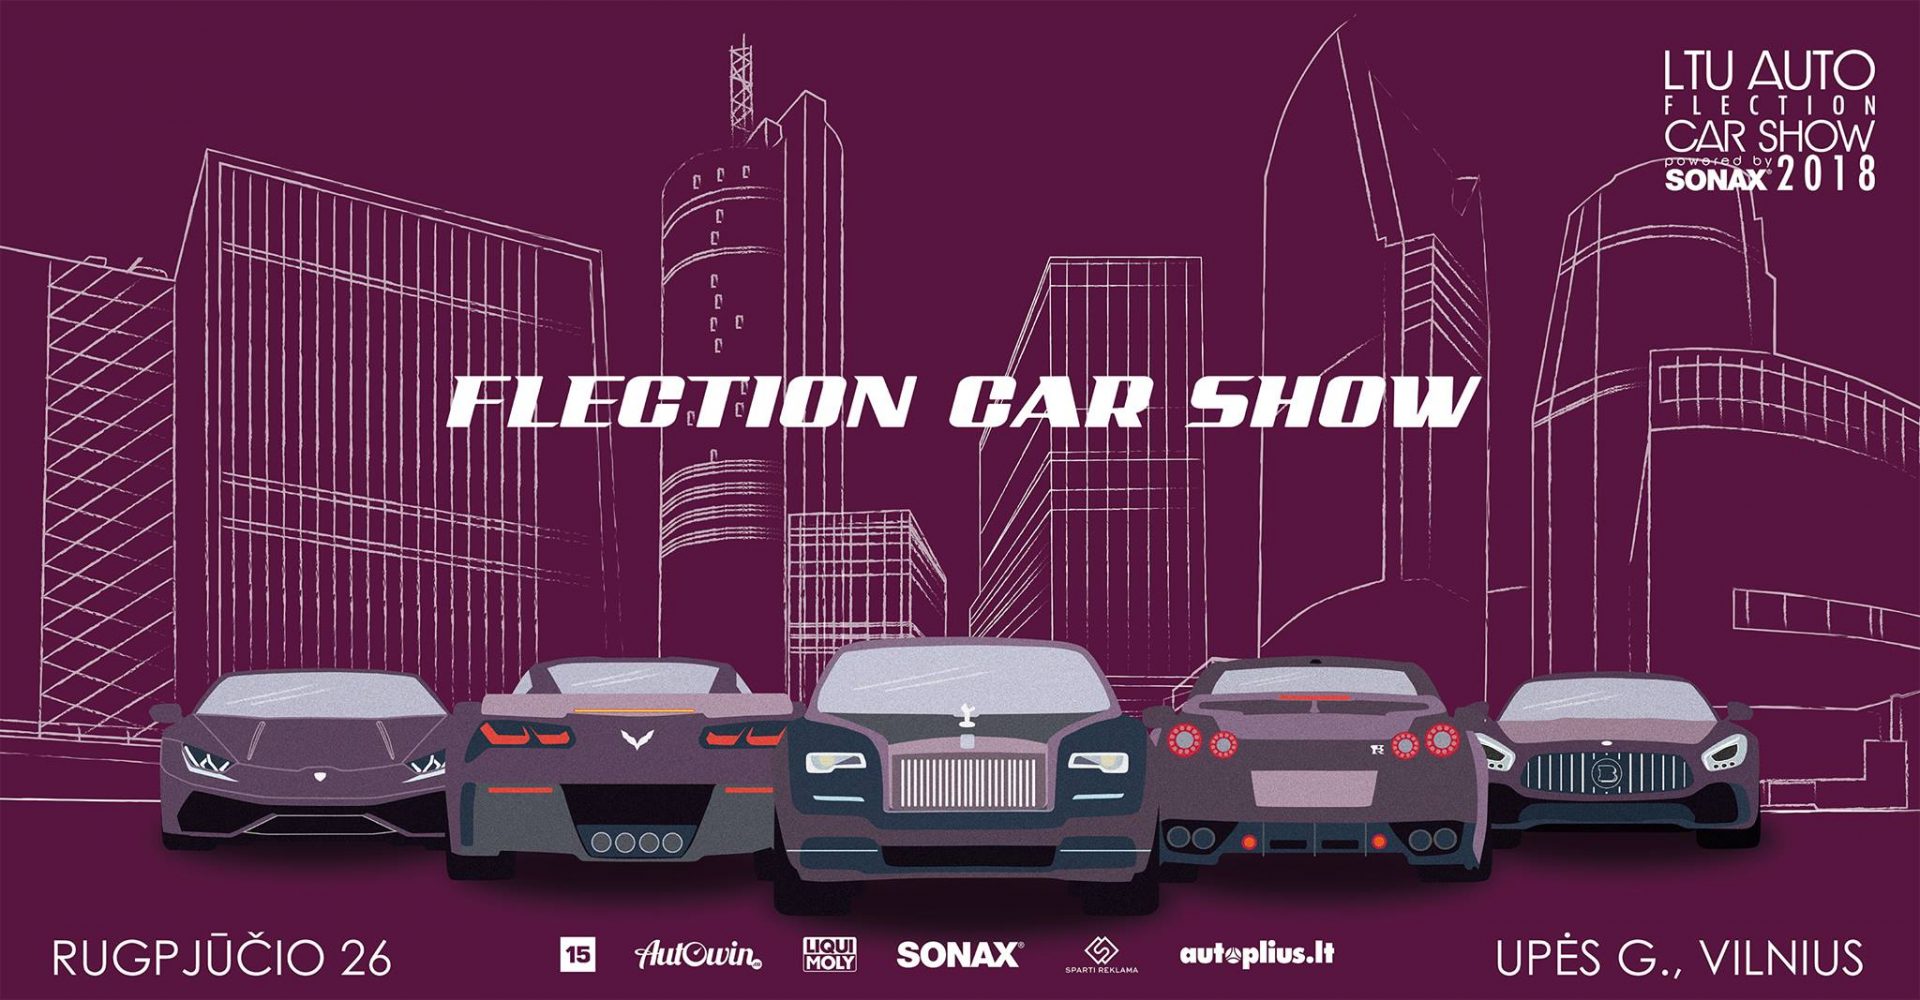 LTU AUTO "Flection 2018" Powered by SONAX